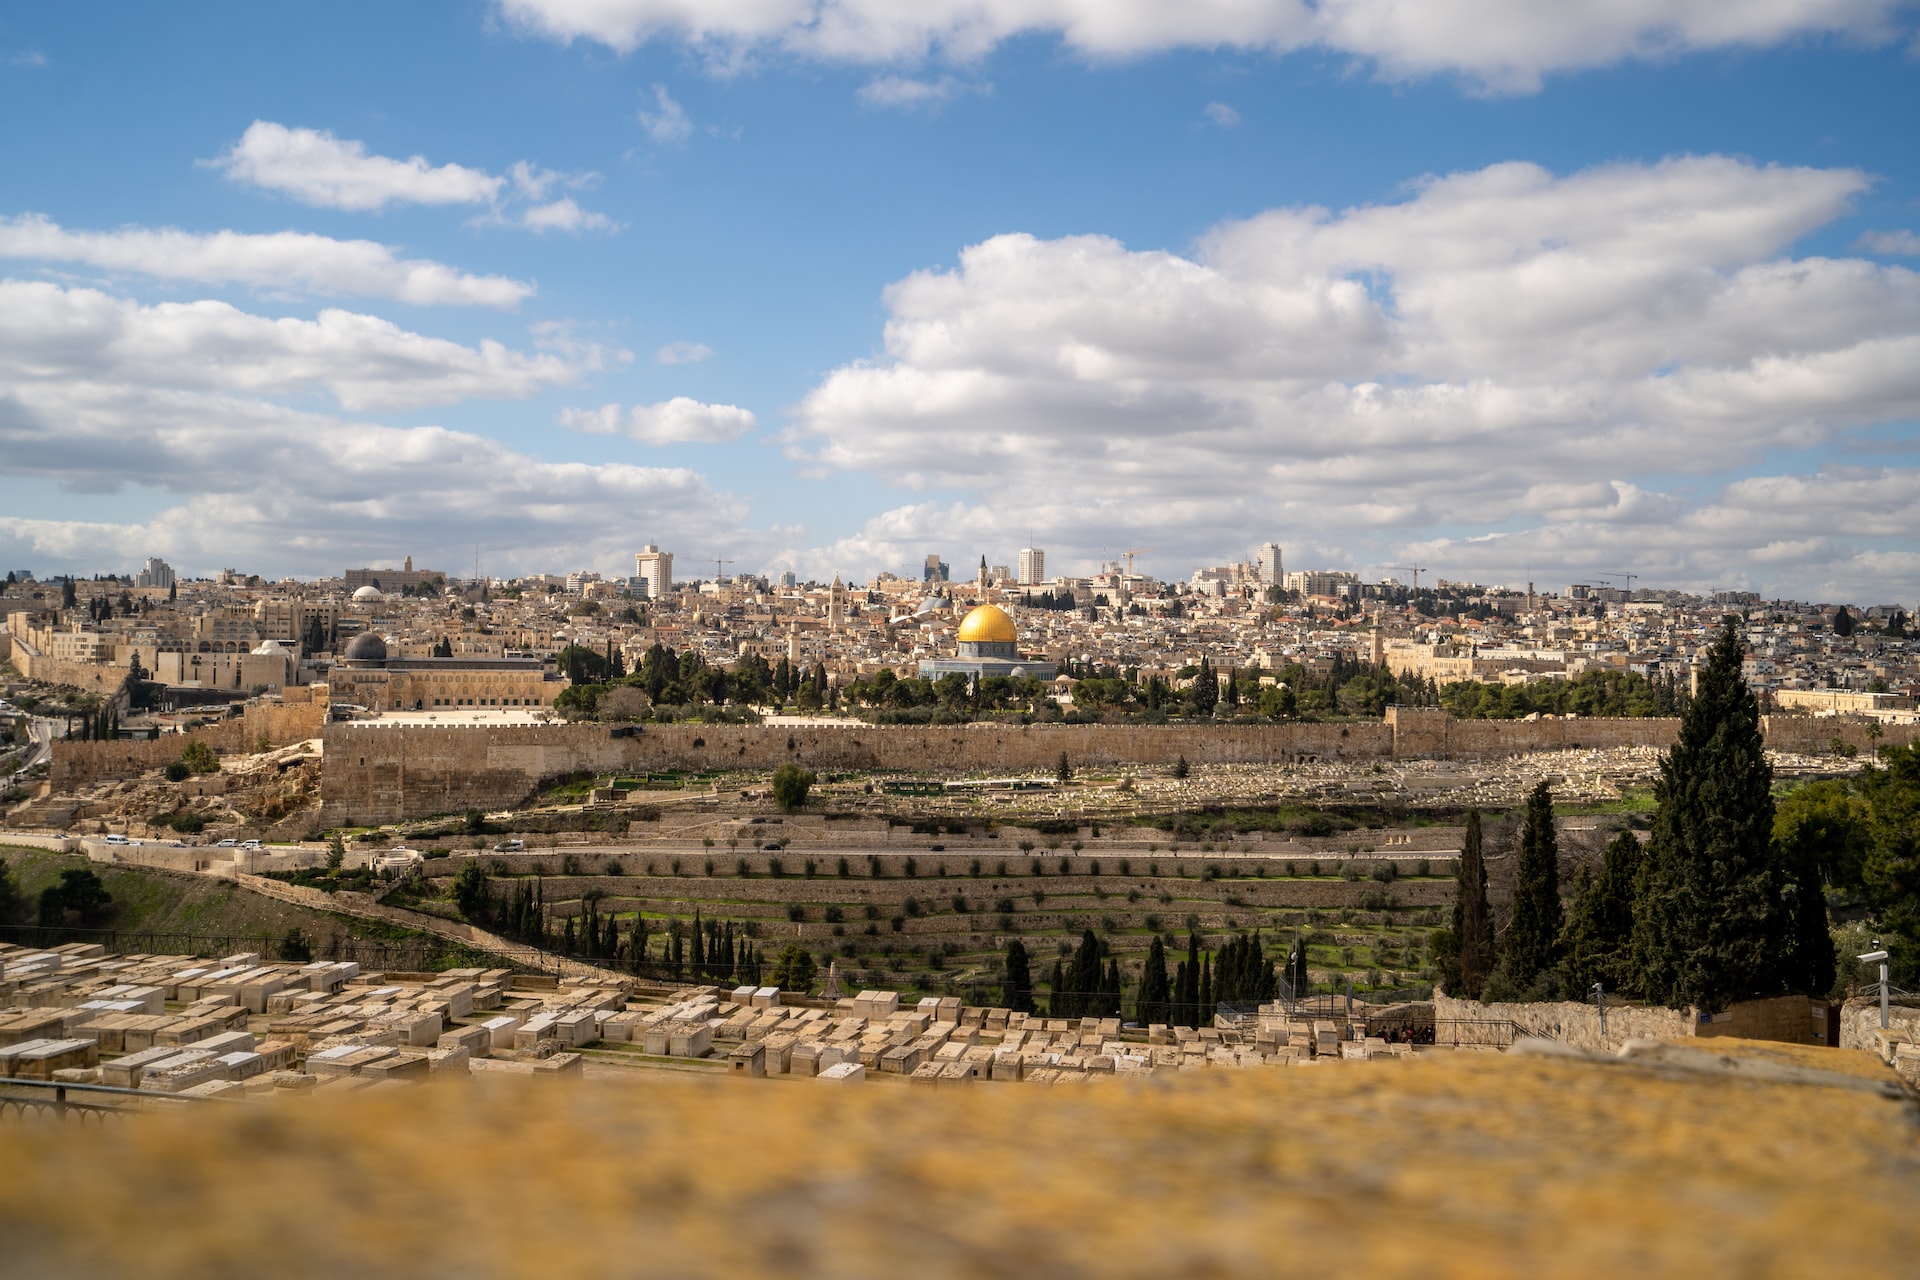 A view of the walls of the old city of Jerusalem, the Temple Mount and Al-Aqsa Mosque from Mt. Scopus in Jerusalem, Israel